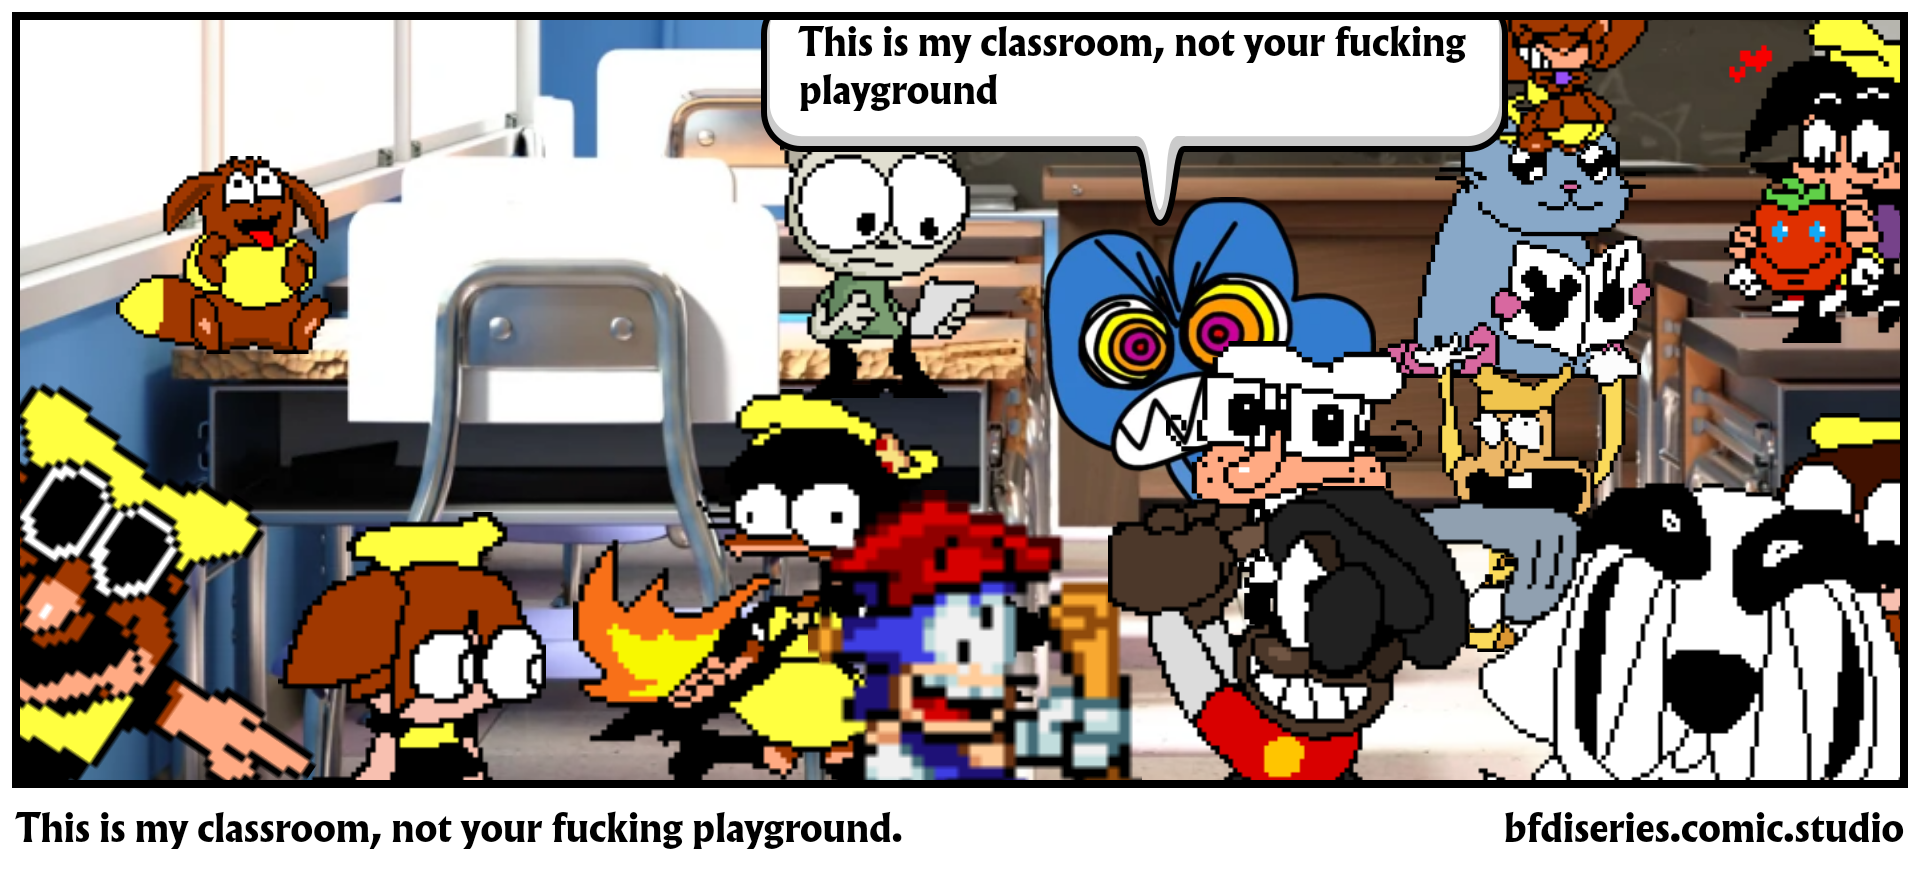 This is my classroom, not your fucking playground.